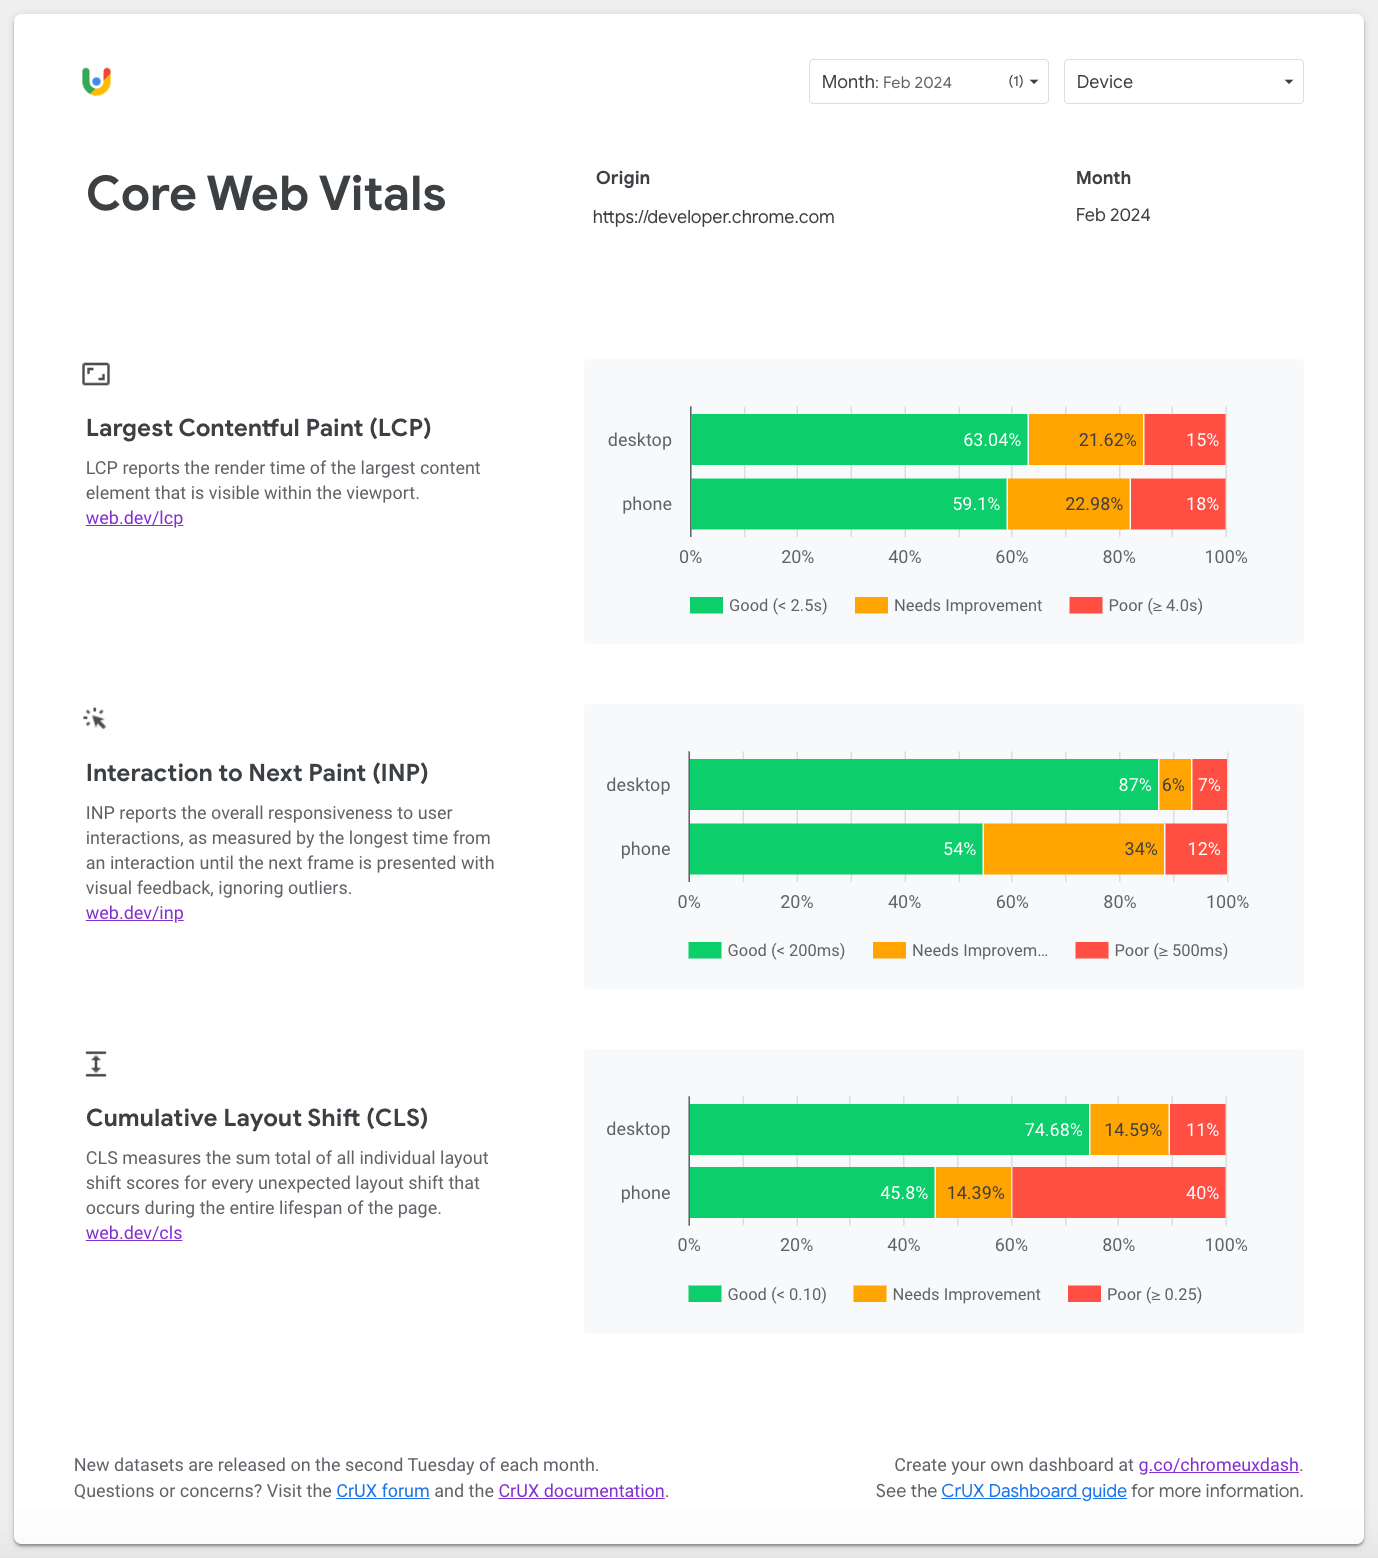 Full page screenshot of the Core Web Vitals overview of the CrUX Dashboard showing details about LCP, INP, and CLS for this site.